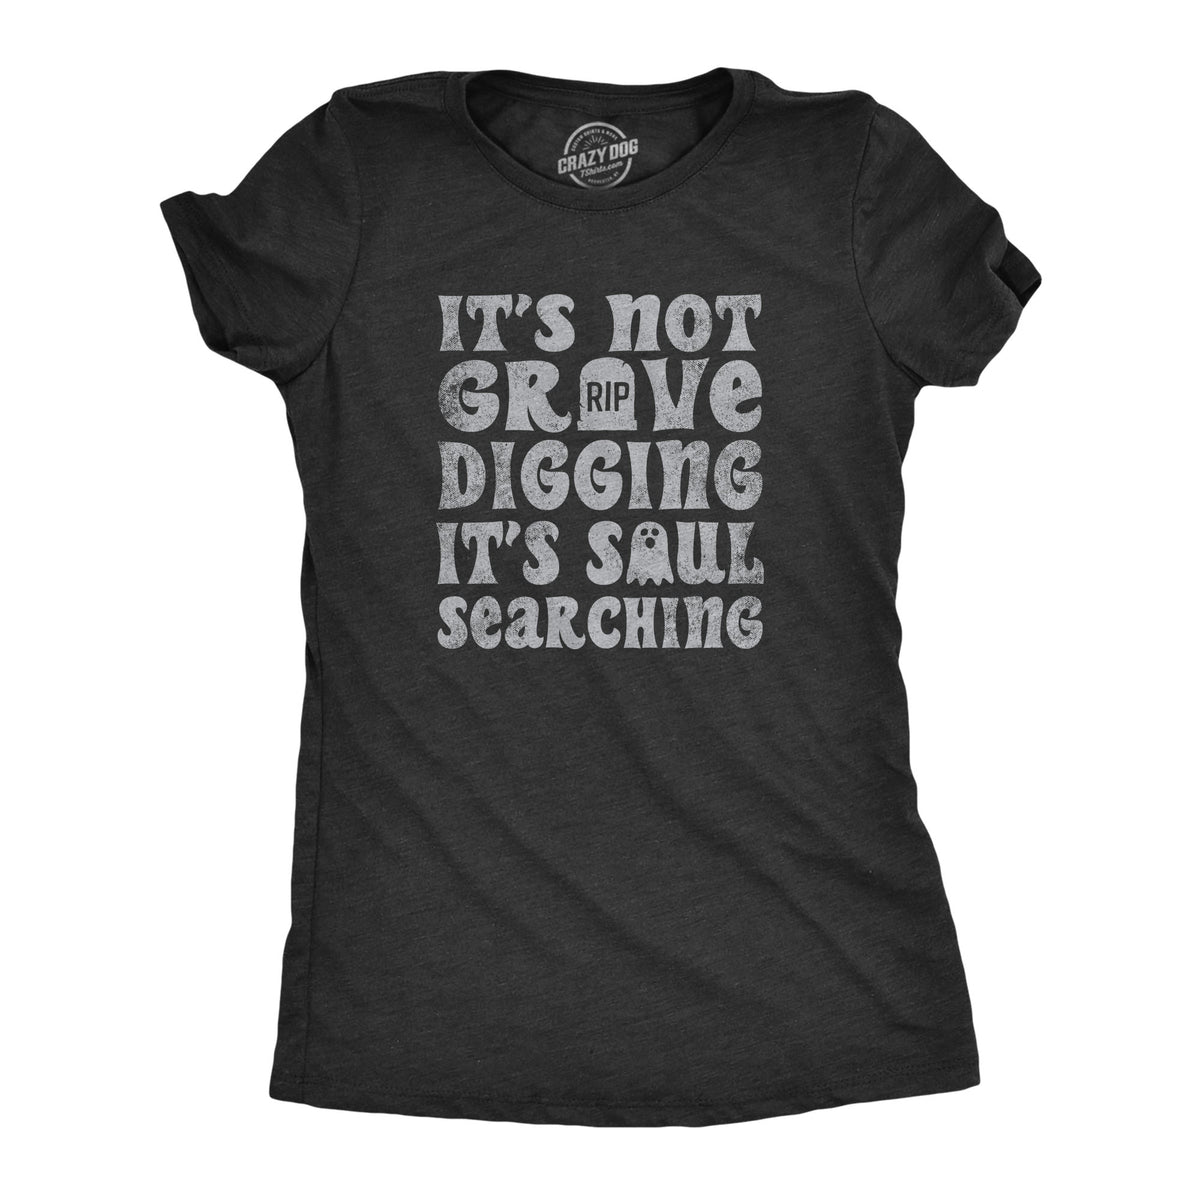 Funny Heather Black - GRAVE Its Not Grave Digging Its Soul Searching Womens T Shirt Nerdy Halloween Sarcastic Tee